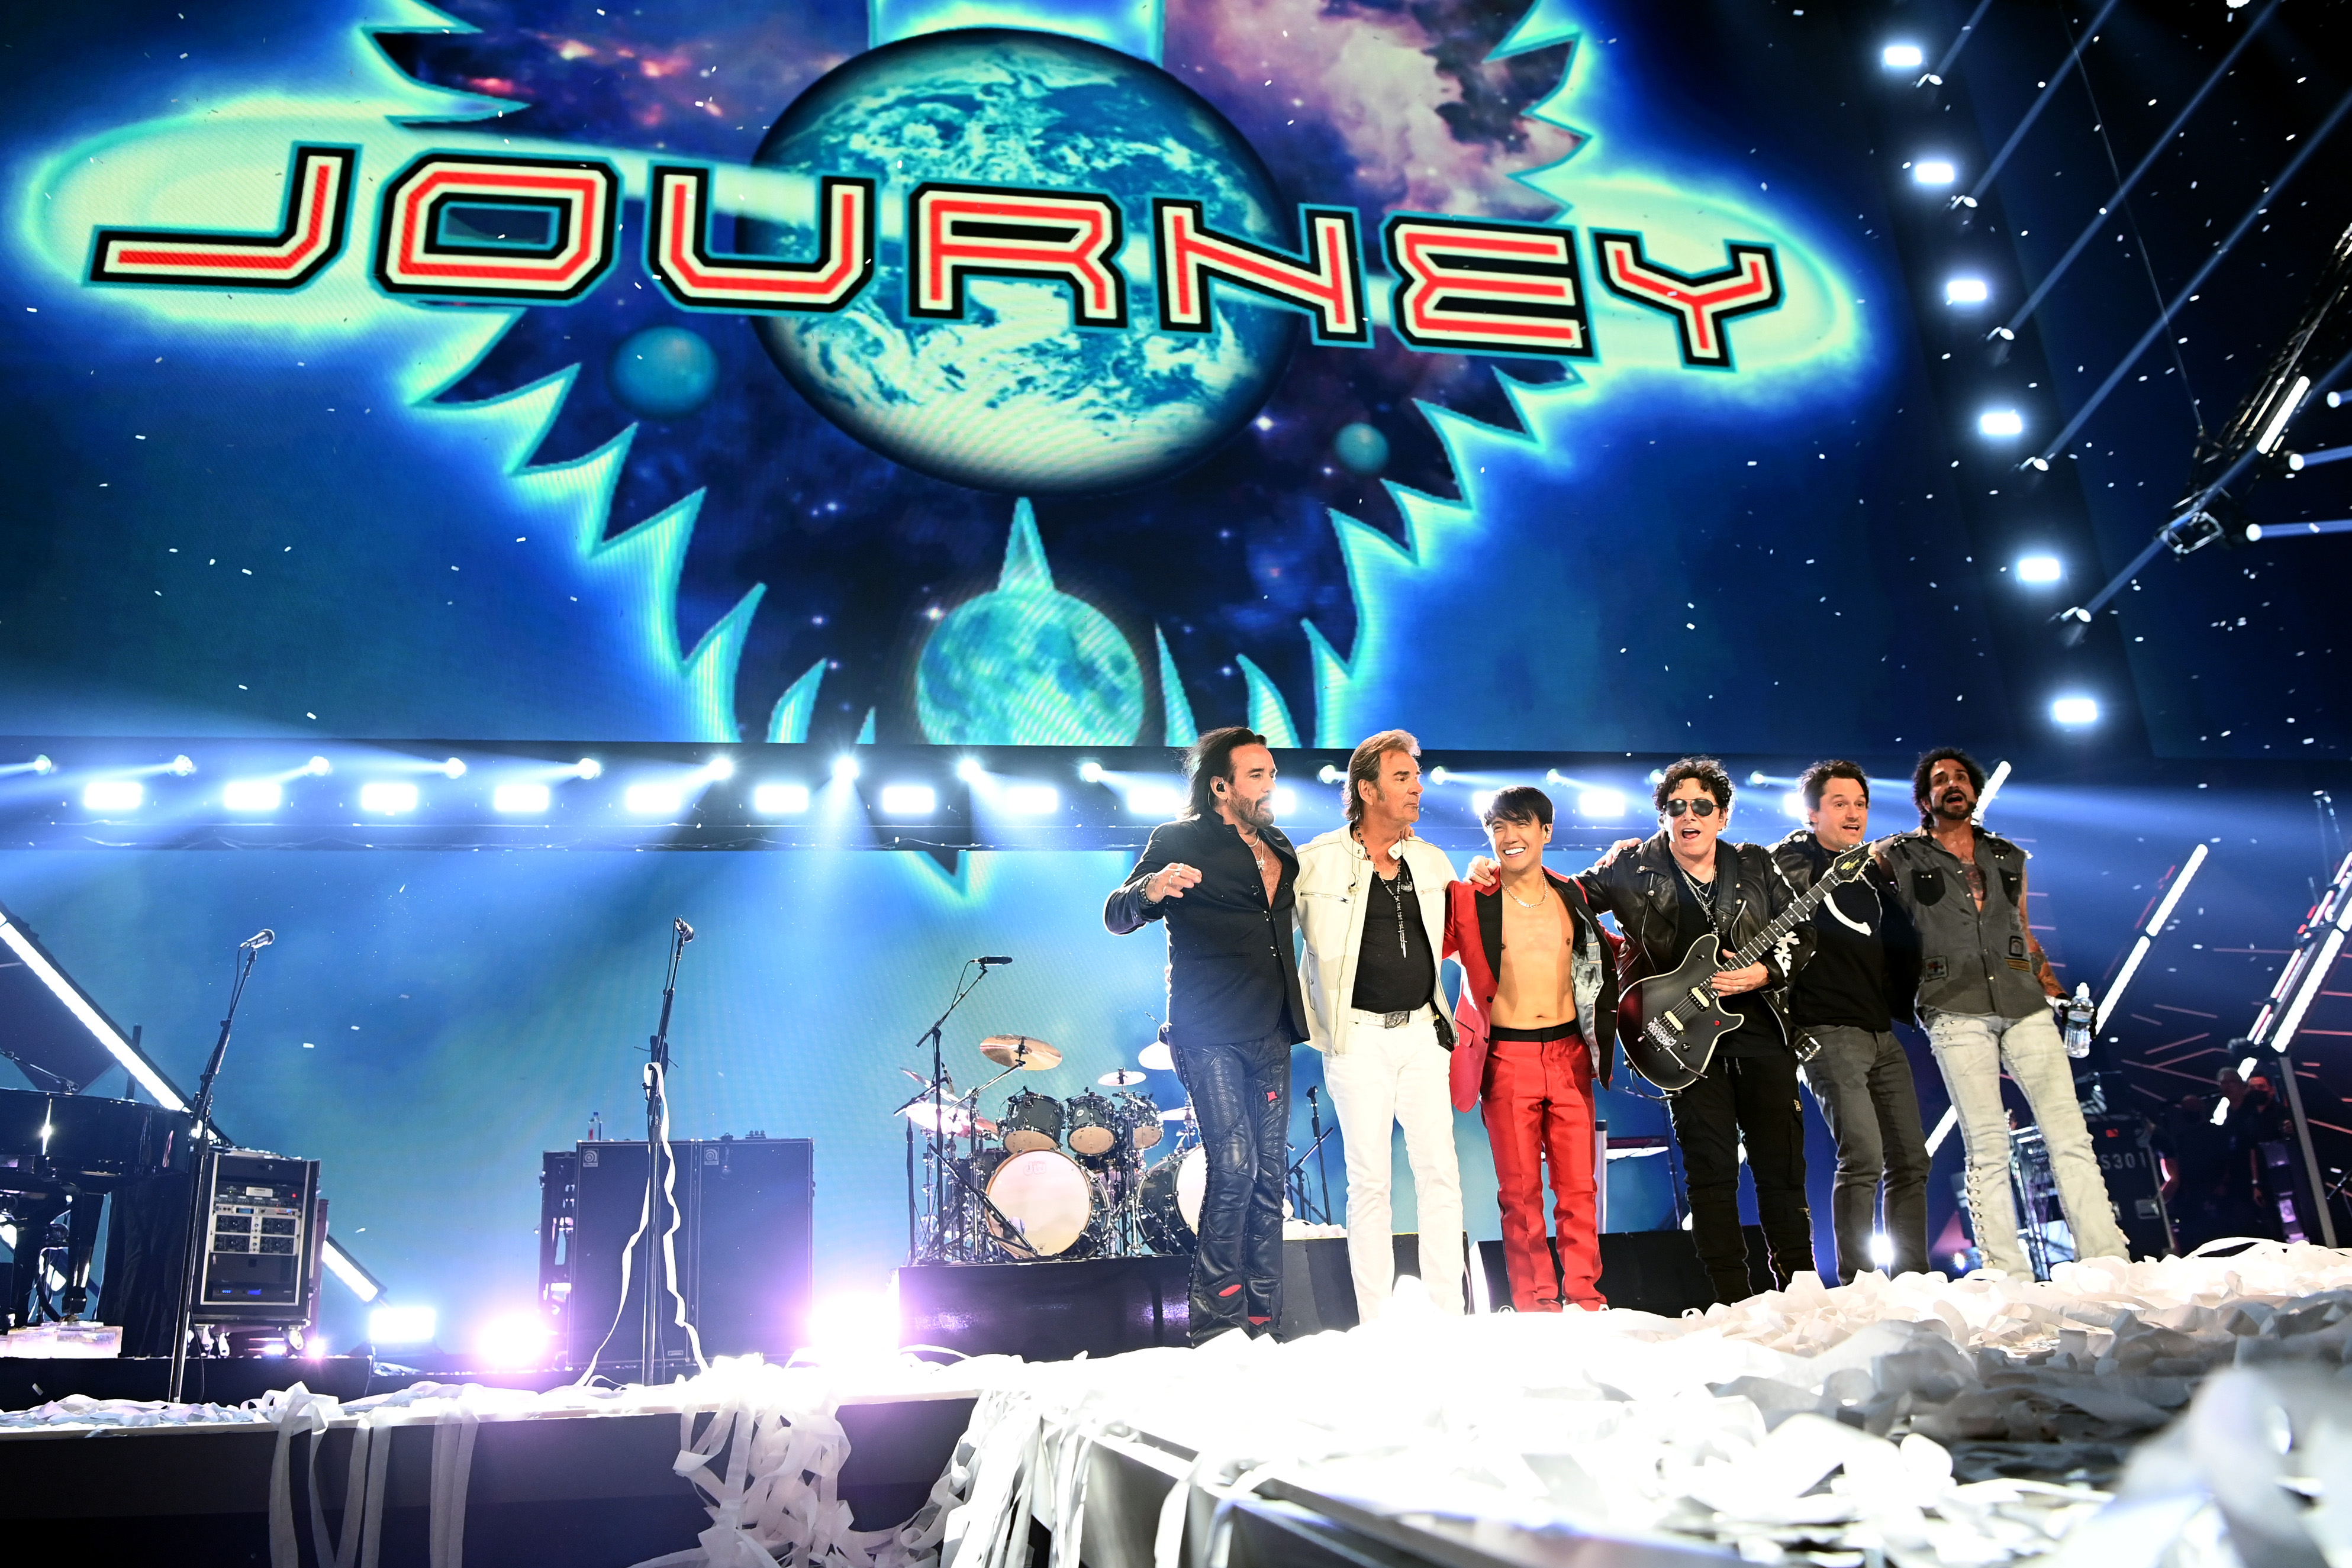 Journey Sets April 2022 Date At Golden 1 Center In Sacramento For New Tour